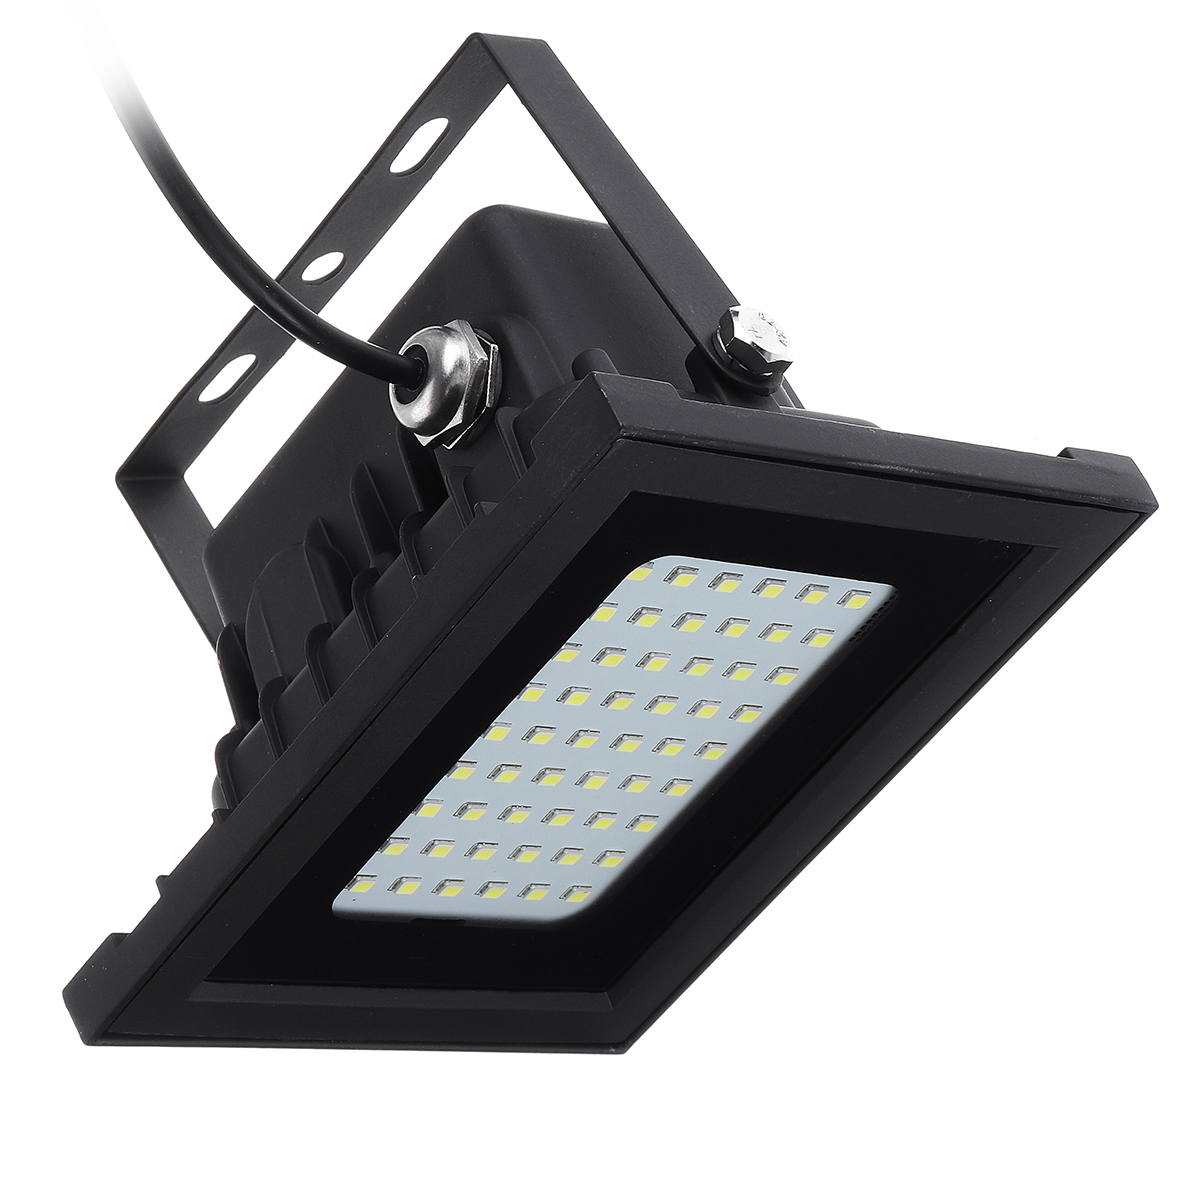 400LM 54 LED Solar Panel Flood Light Spotlight Project Lamp IP65 Waterproof Outdoor Camping Emergency Lantern With Remote Control 21